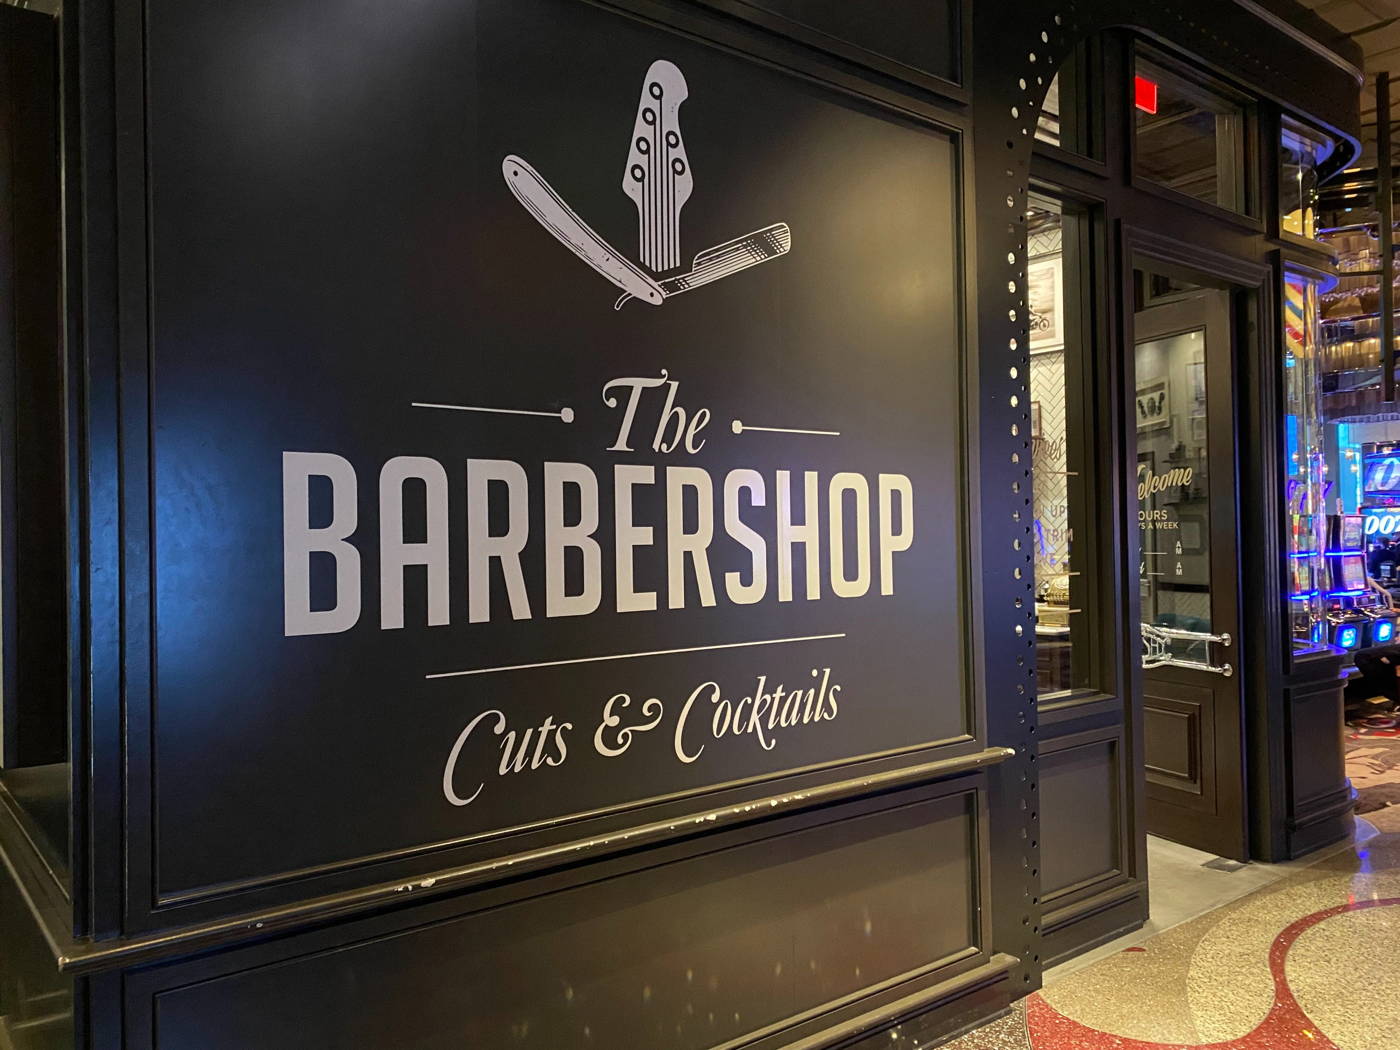 The Barbershop Cuts and Cocktails at The Cosmopolitan Las Vegas